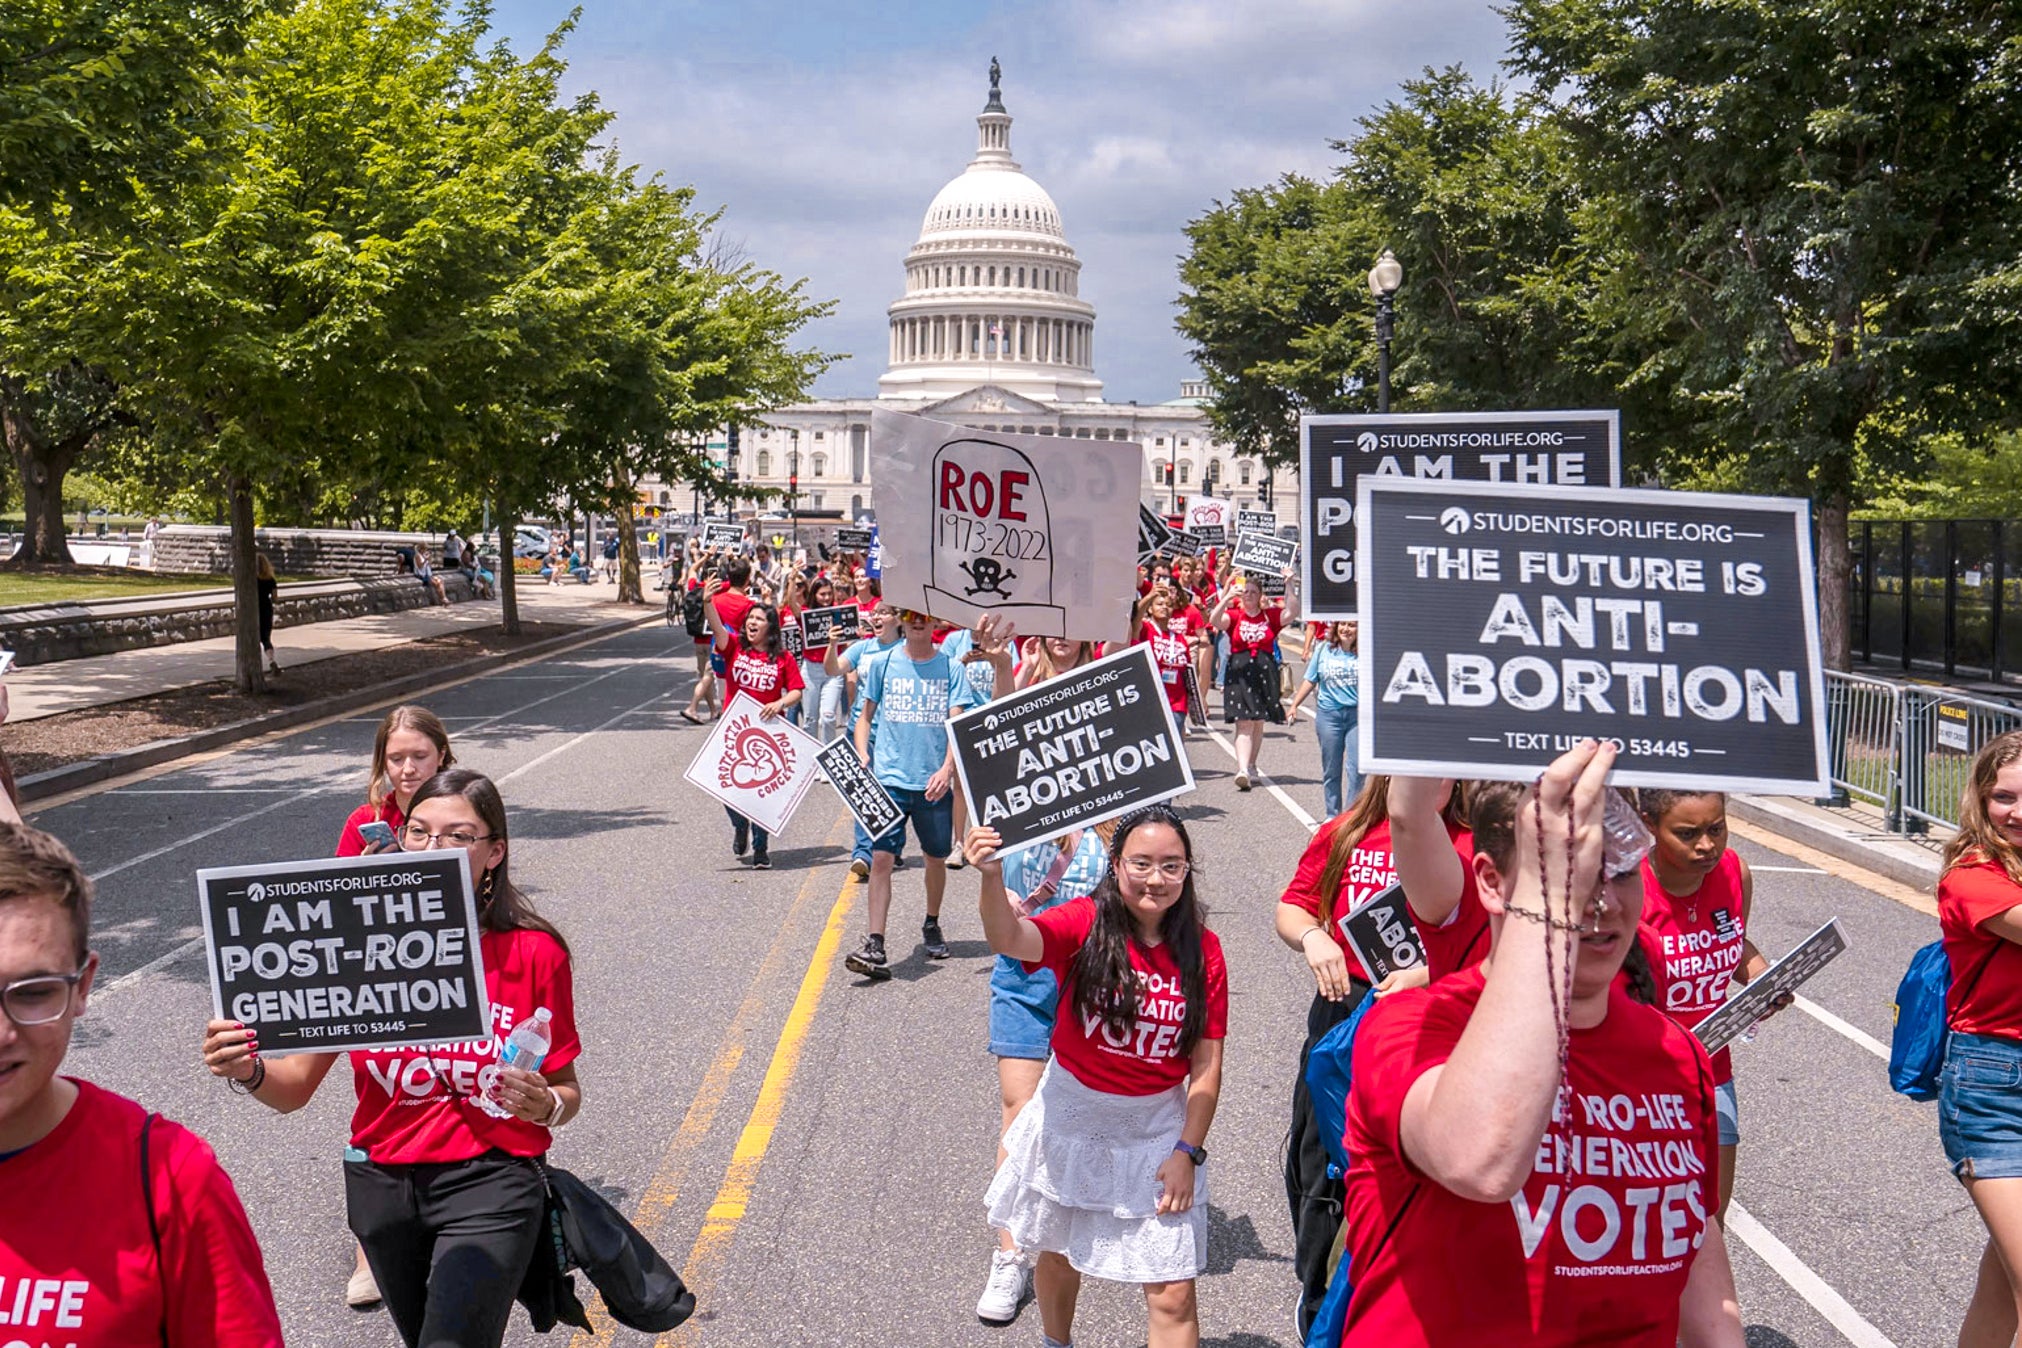 Anti-abortion activists demonstrate in front of the U.S. Supreme Court after the Court announced a ruling in the Dobbs v Jackson Women's Health Organization case, carrying signs that say "The future is Anti-Abortion."